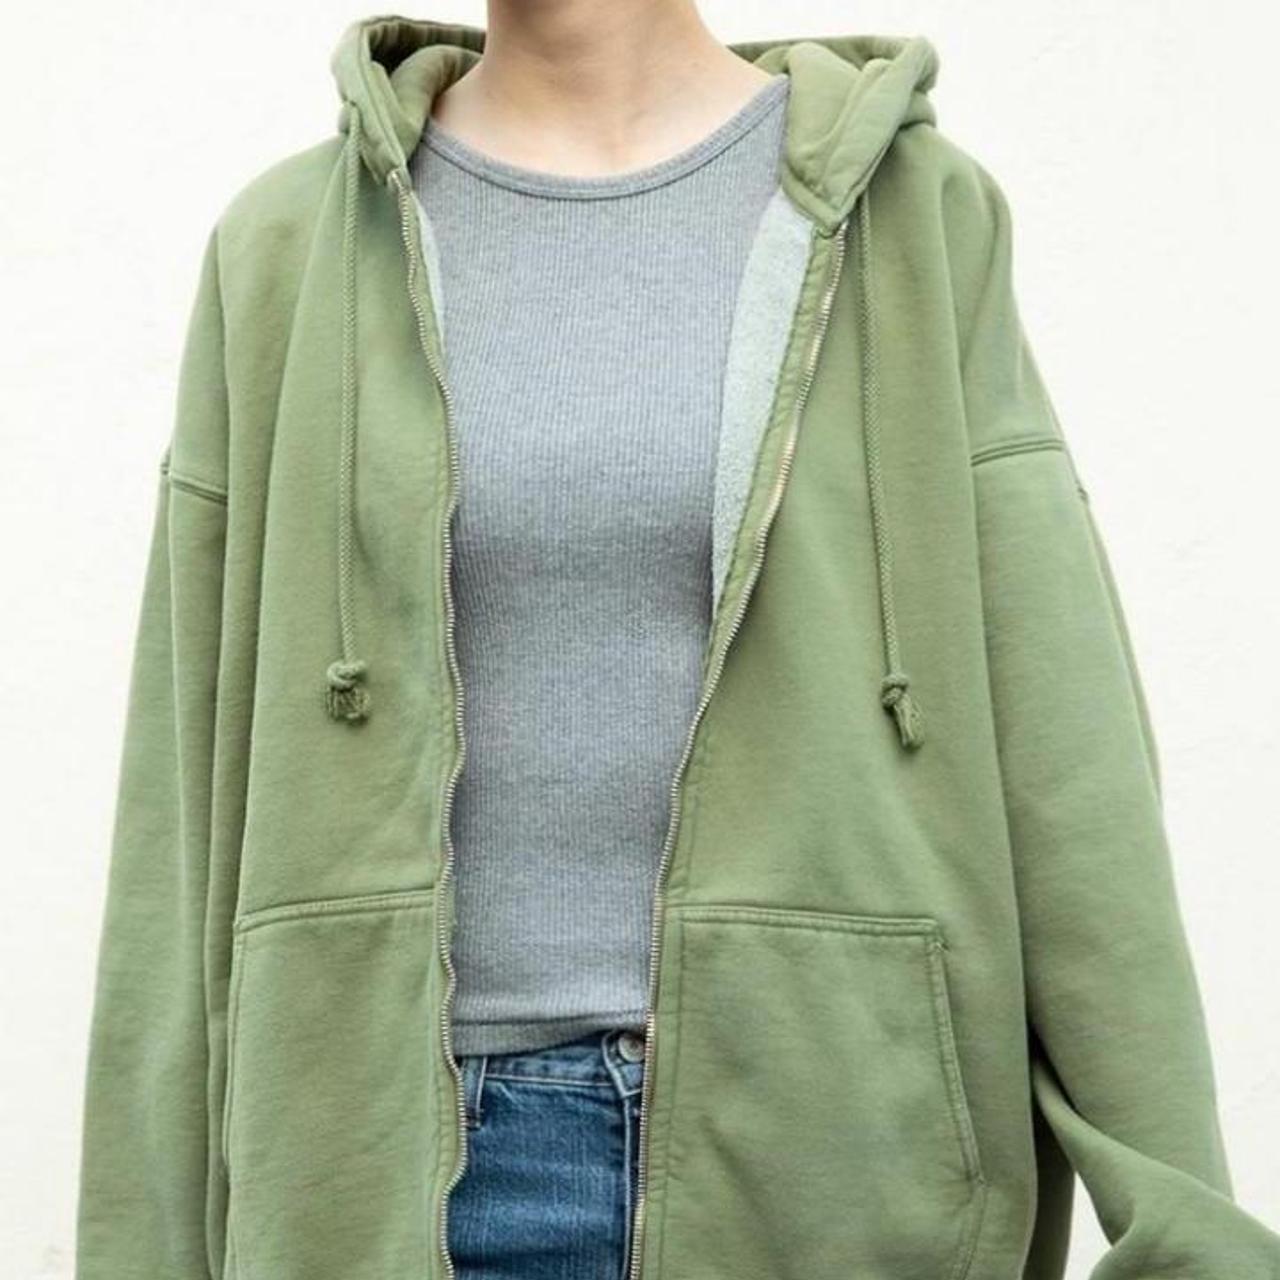 Brandy Melville Carla Hoodie Green - $45 New With Tags - From Ava